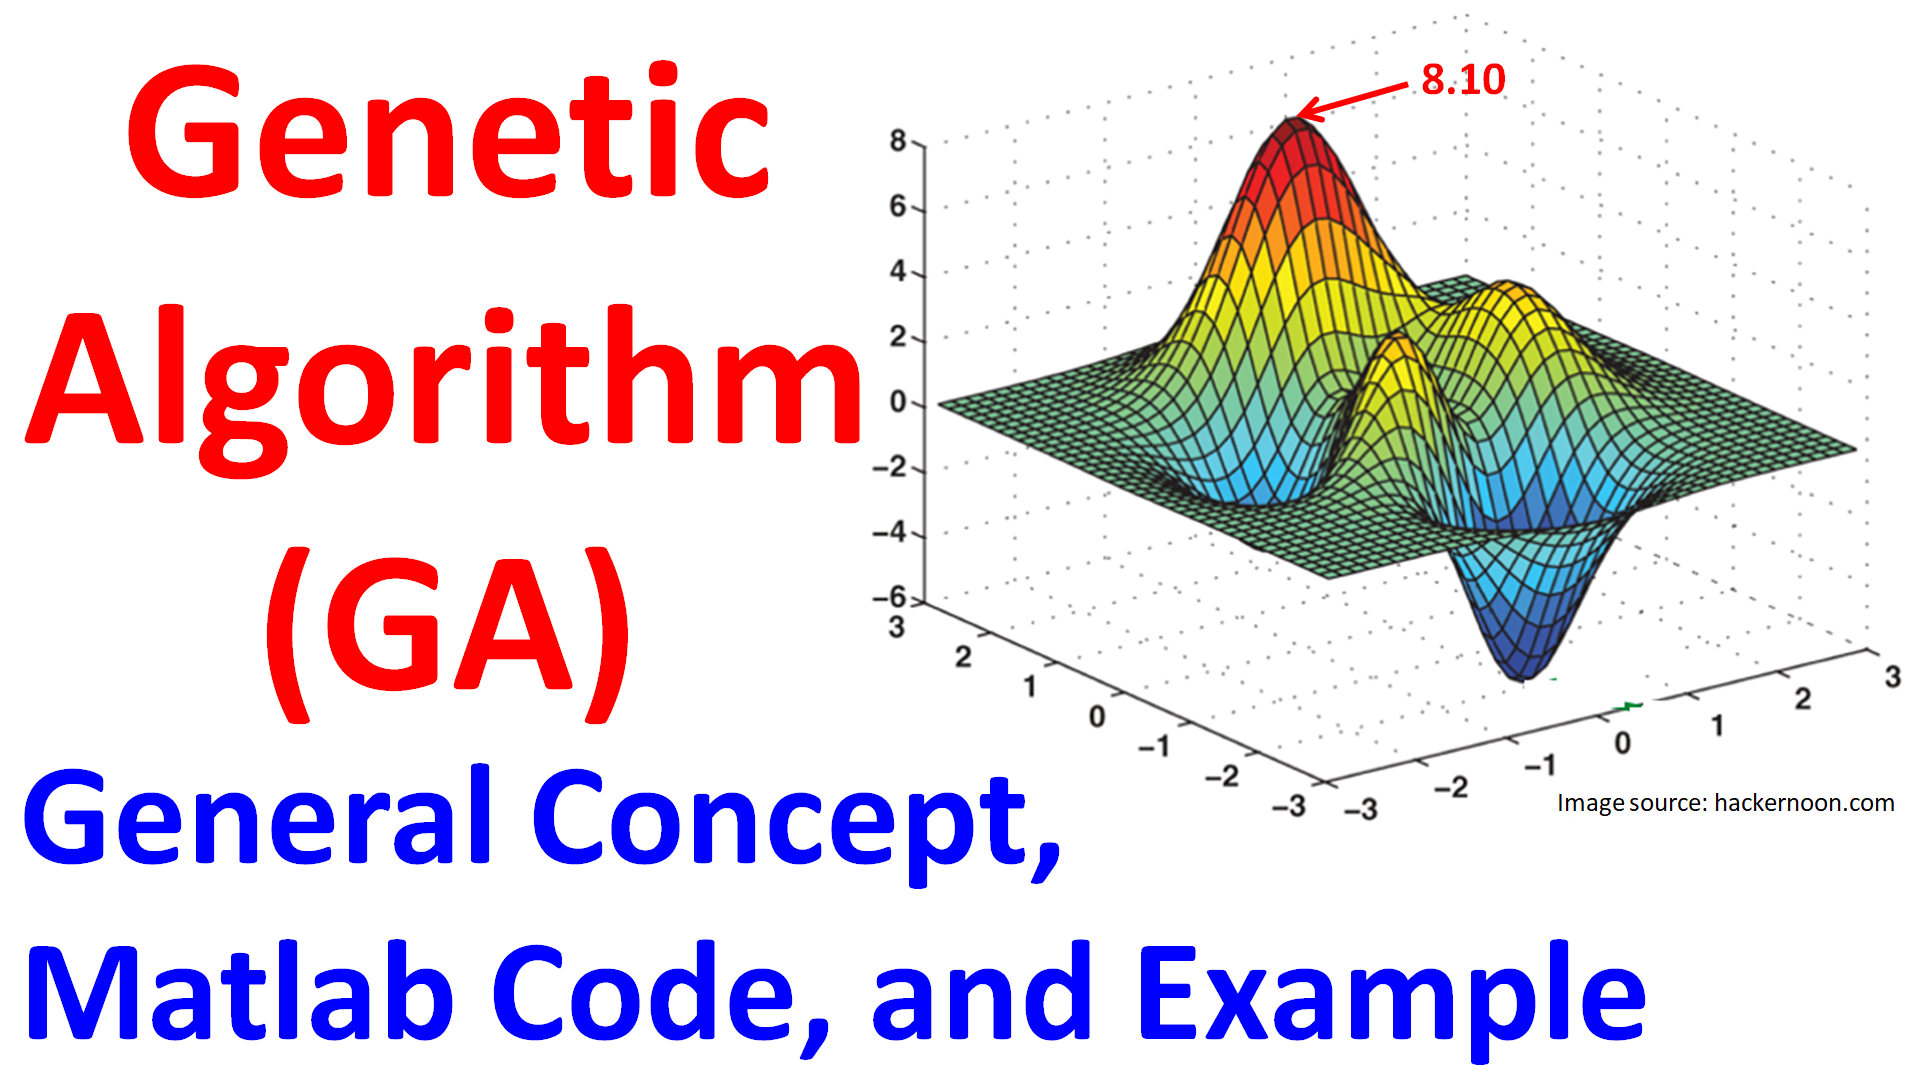 Genetic Algorithm: General Concept, Matlab Code, and Example